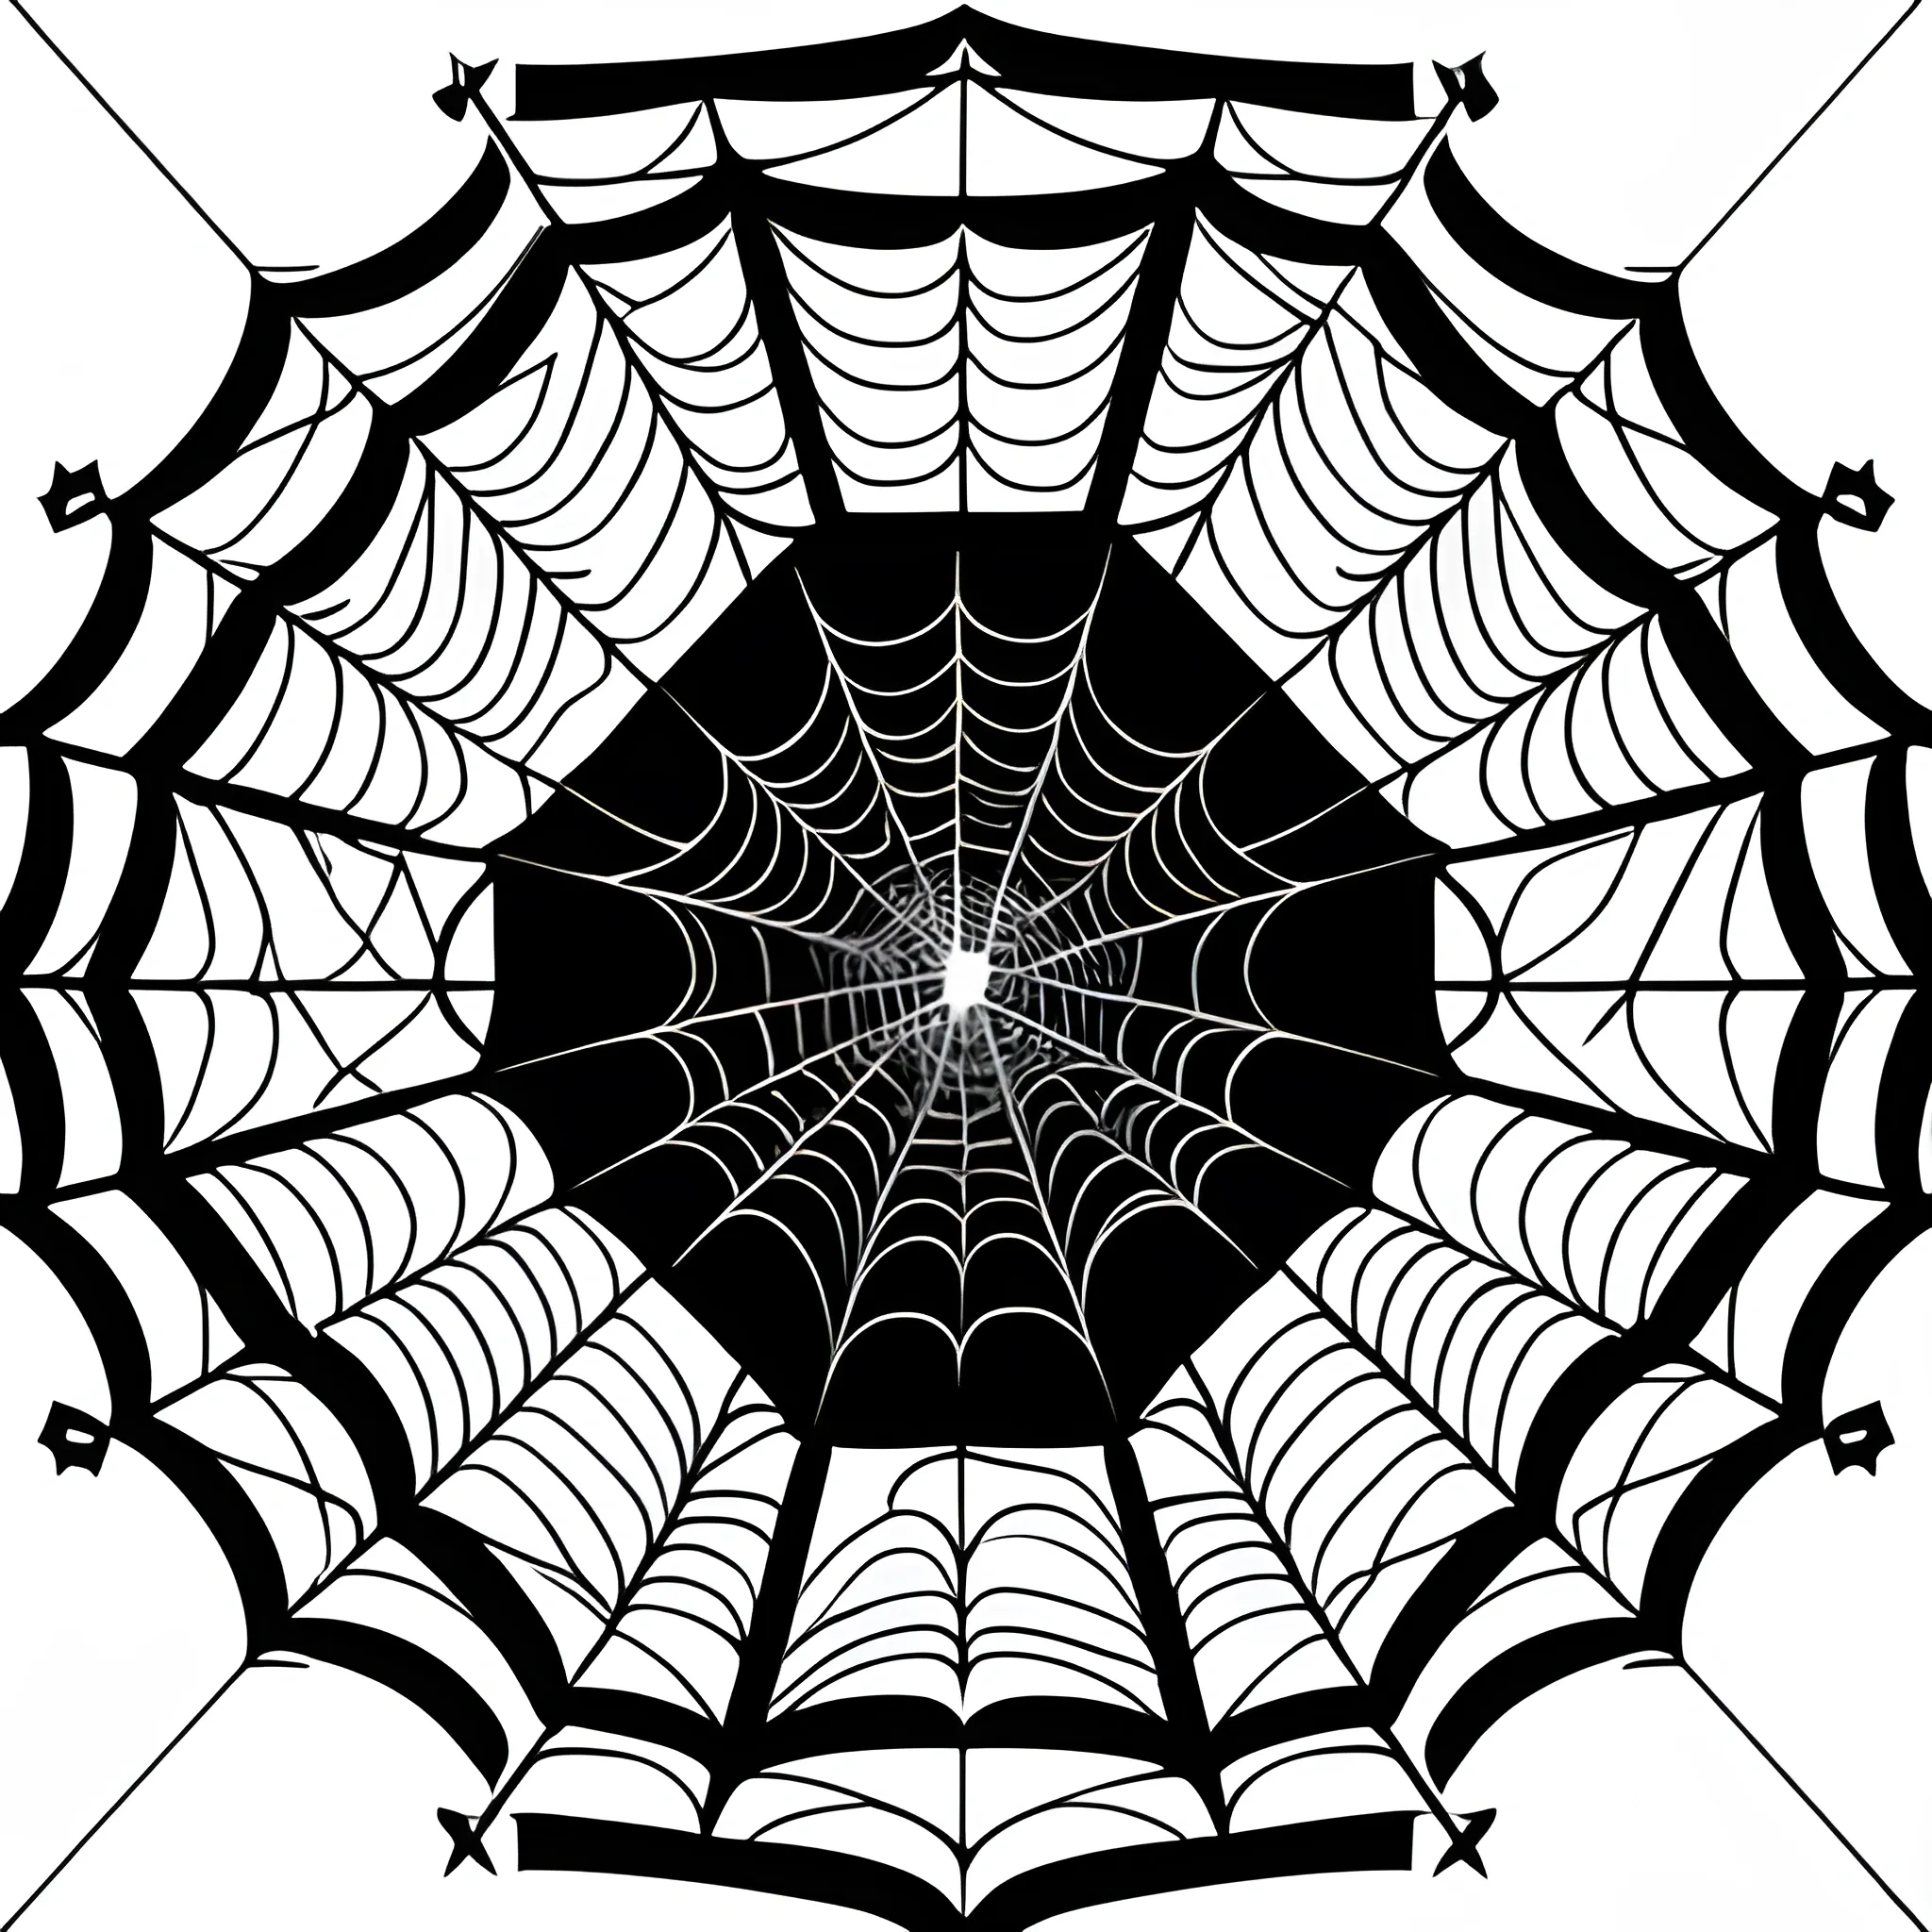 A powerpoint style beautiful spiderweb like diagram
